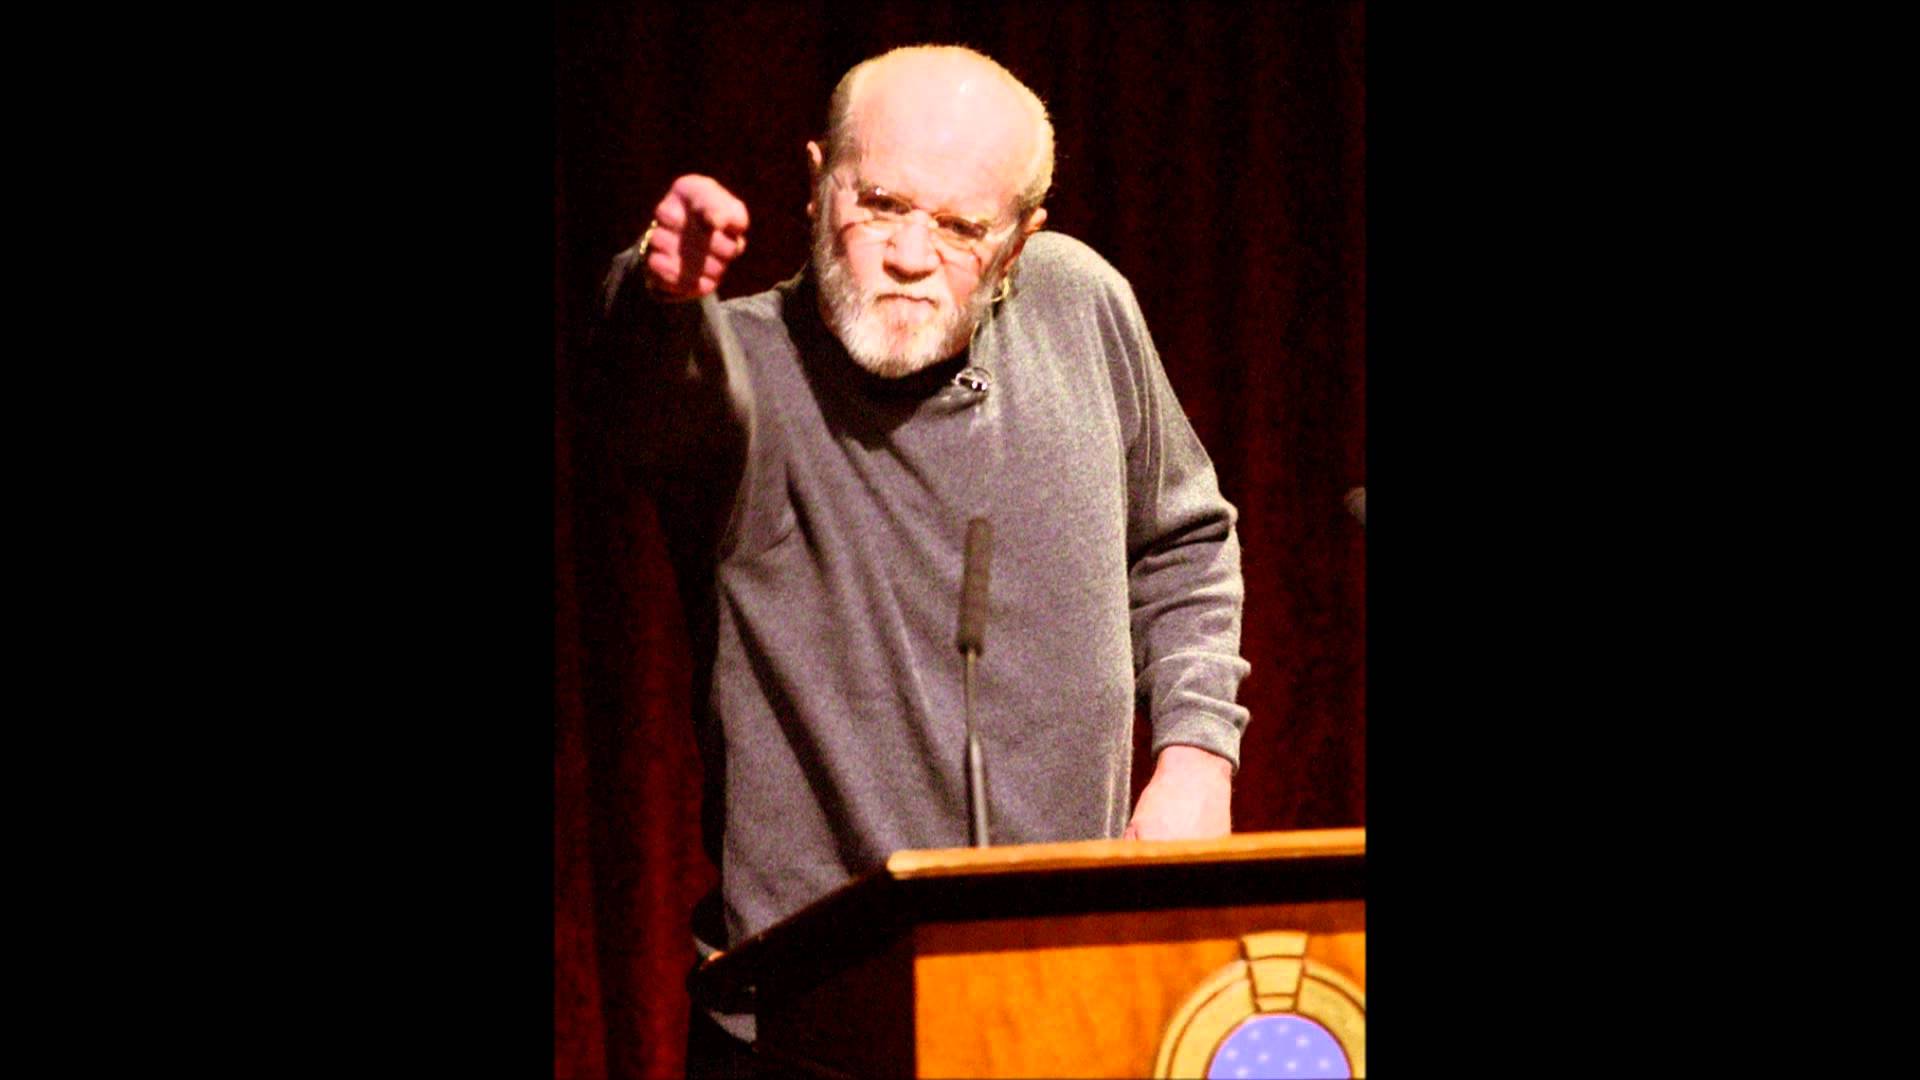 Sunday Stand Up: George Carlin's “Seven Dirty Words” | Humor in ...